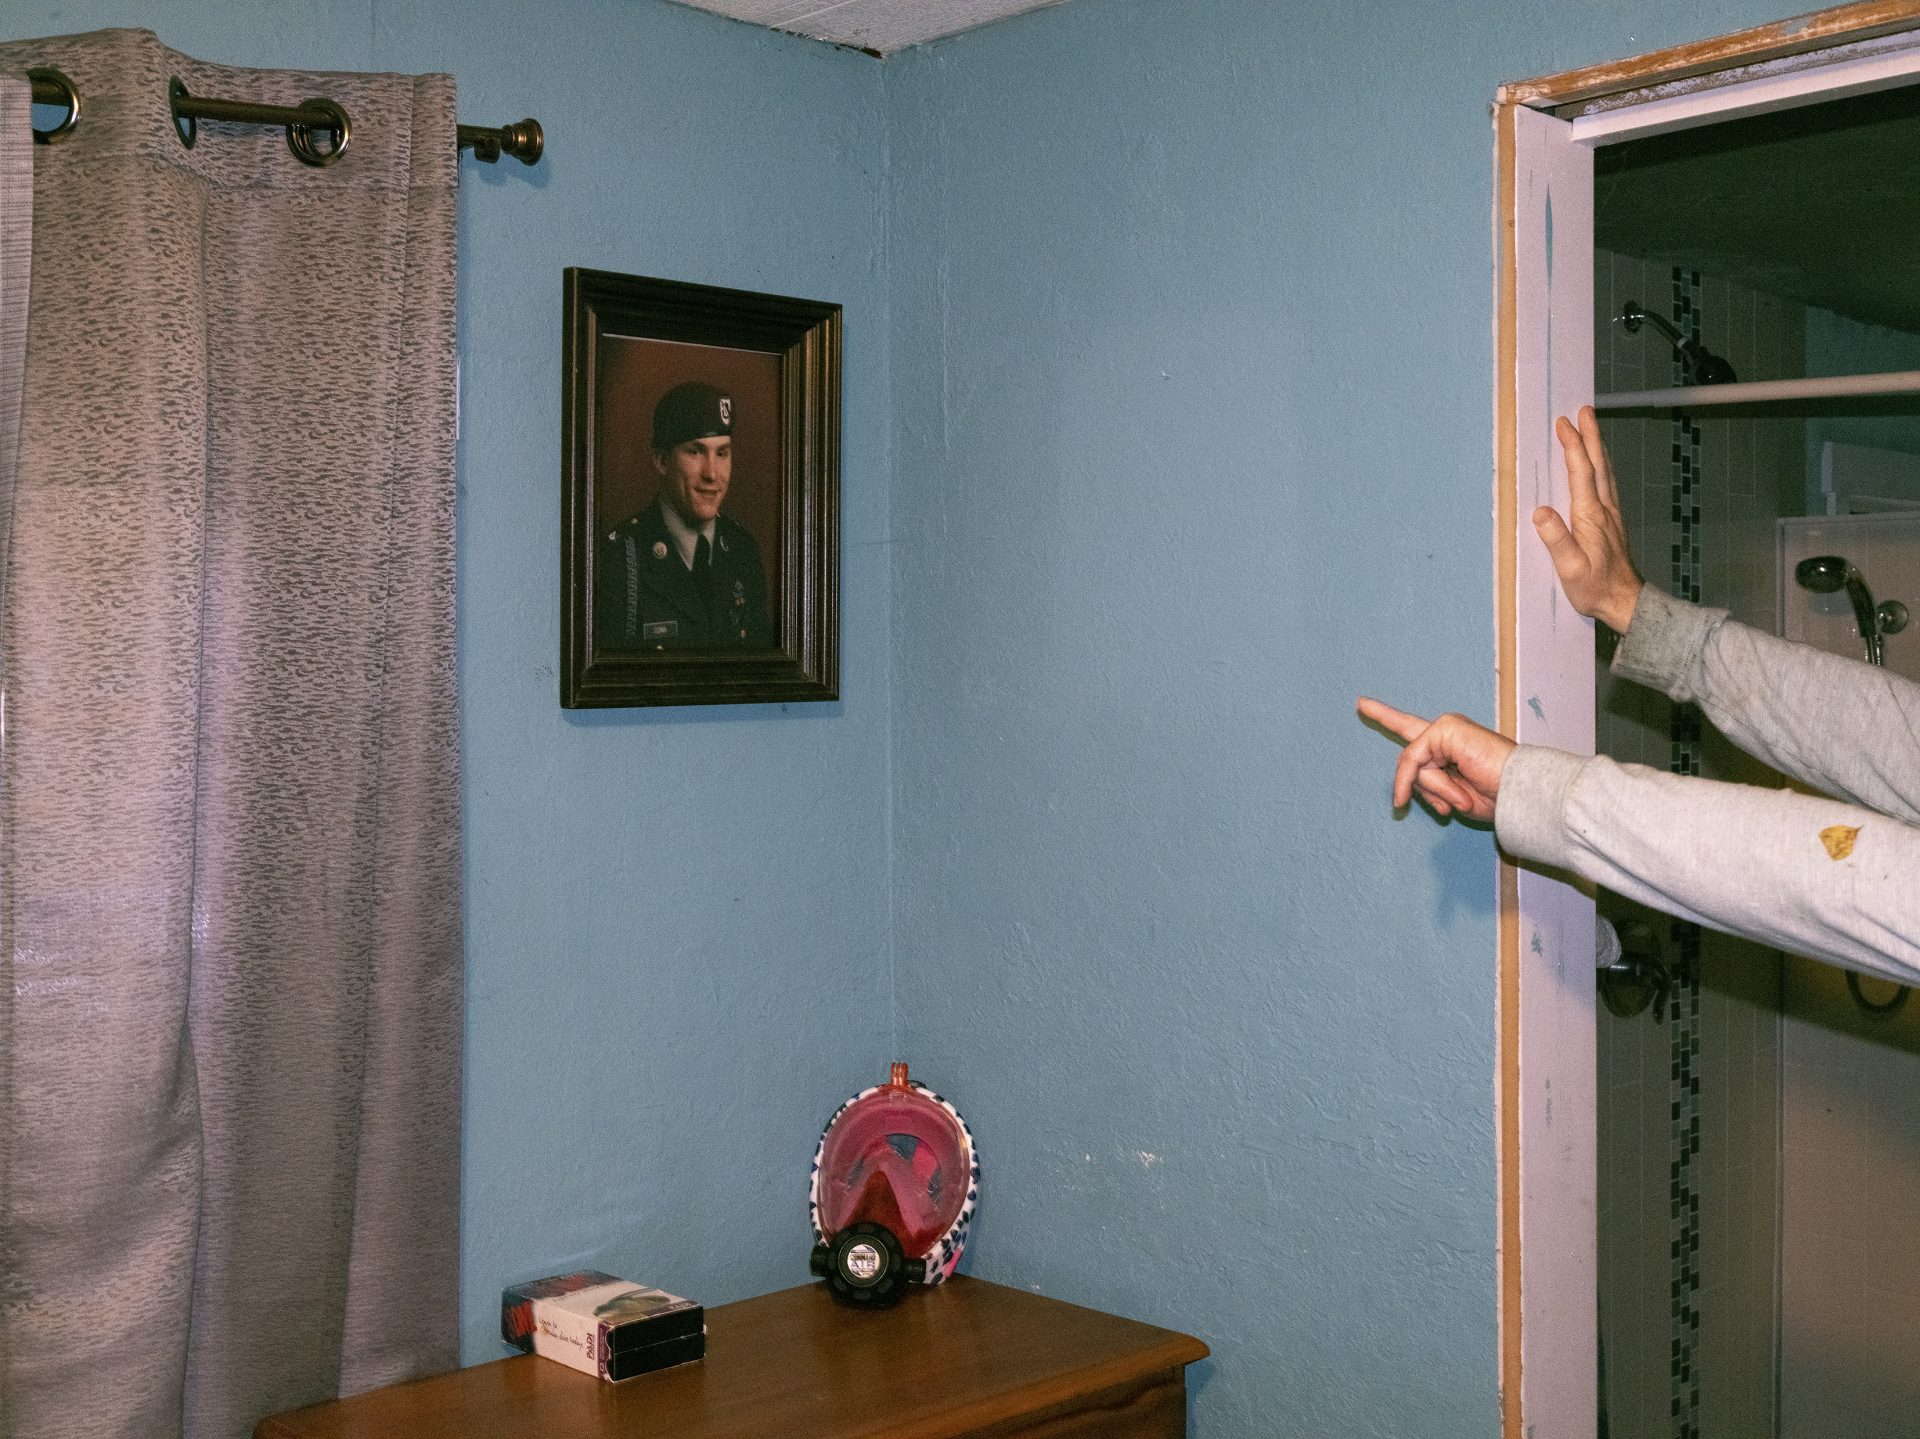 Chuck's military service photo hangs on the wall of his bedroom in his mother's house in Shelton, a reminder of his life before being incarcerated.